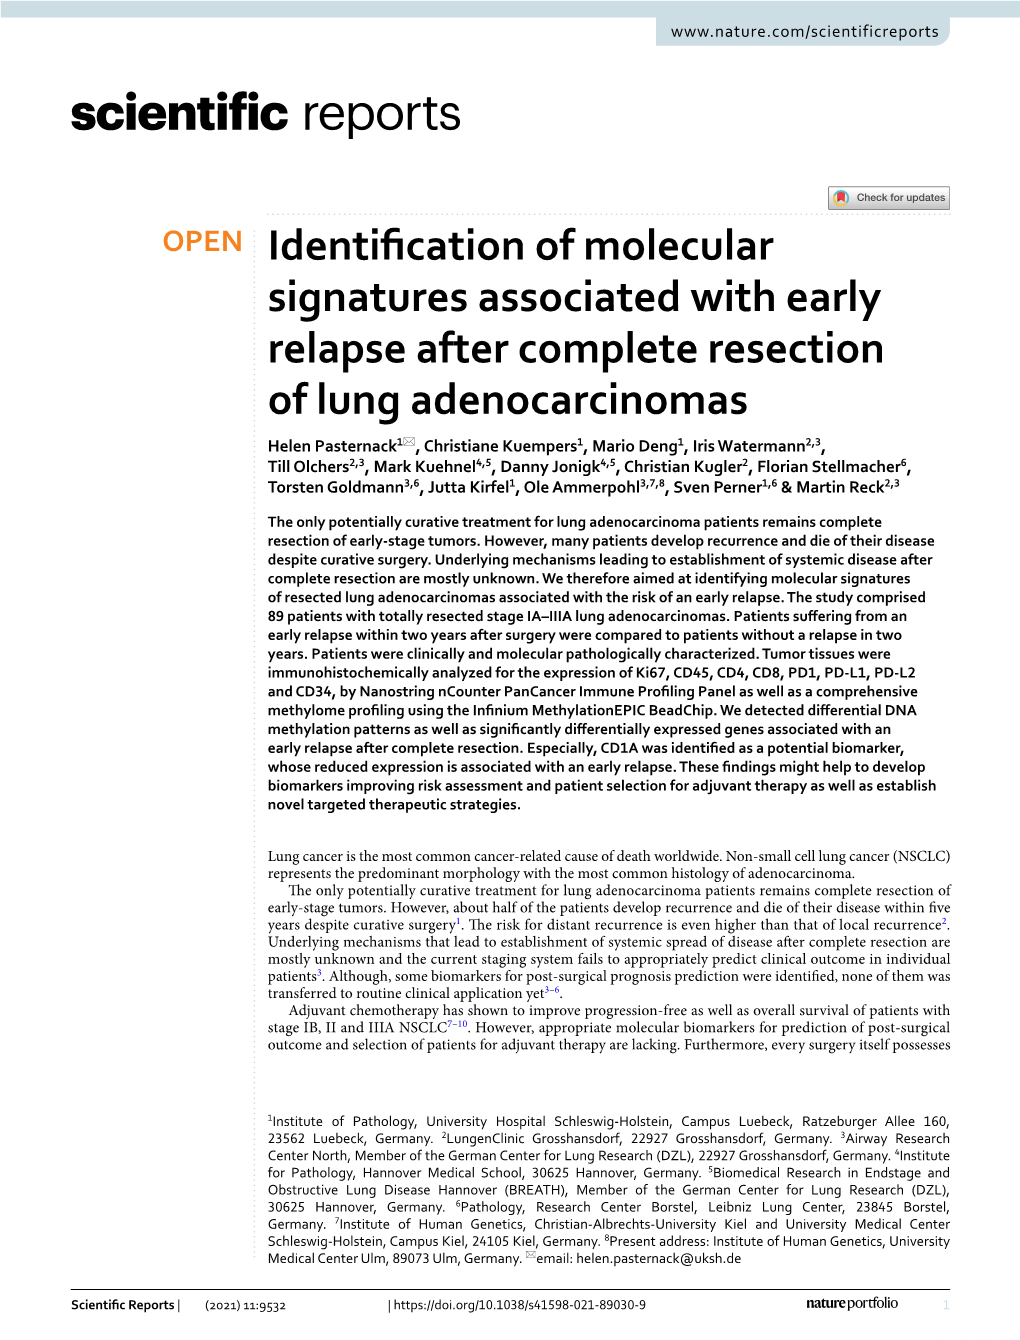 Identification of Molecular Signatures Associated with Early Relapse After